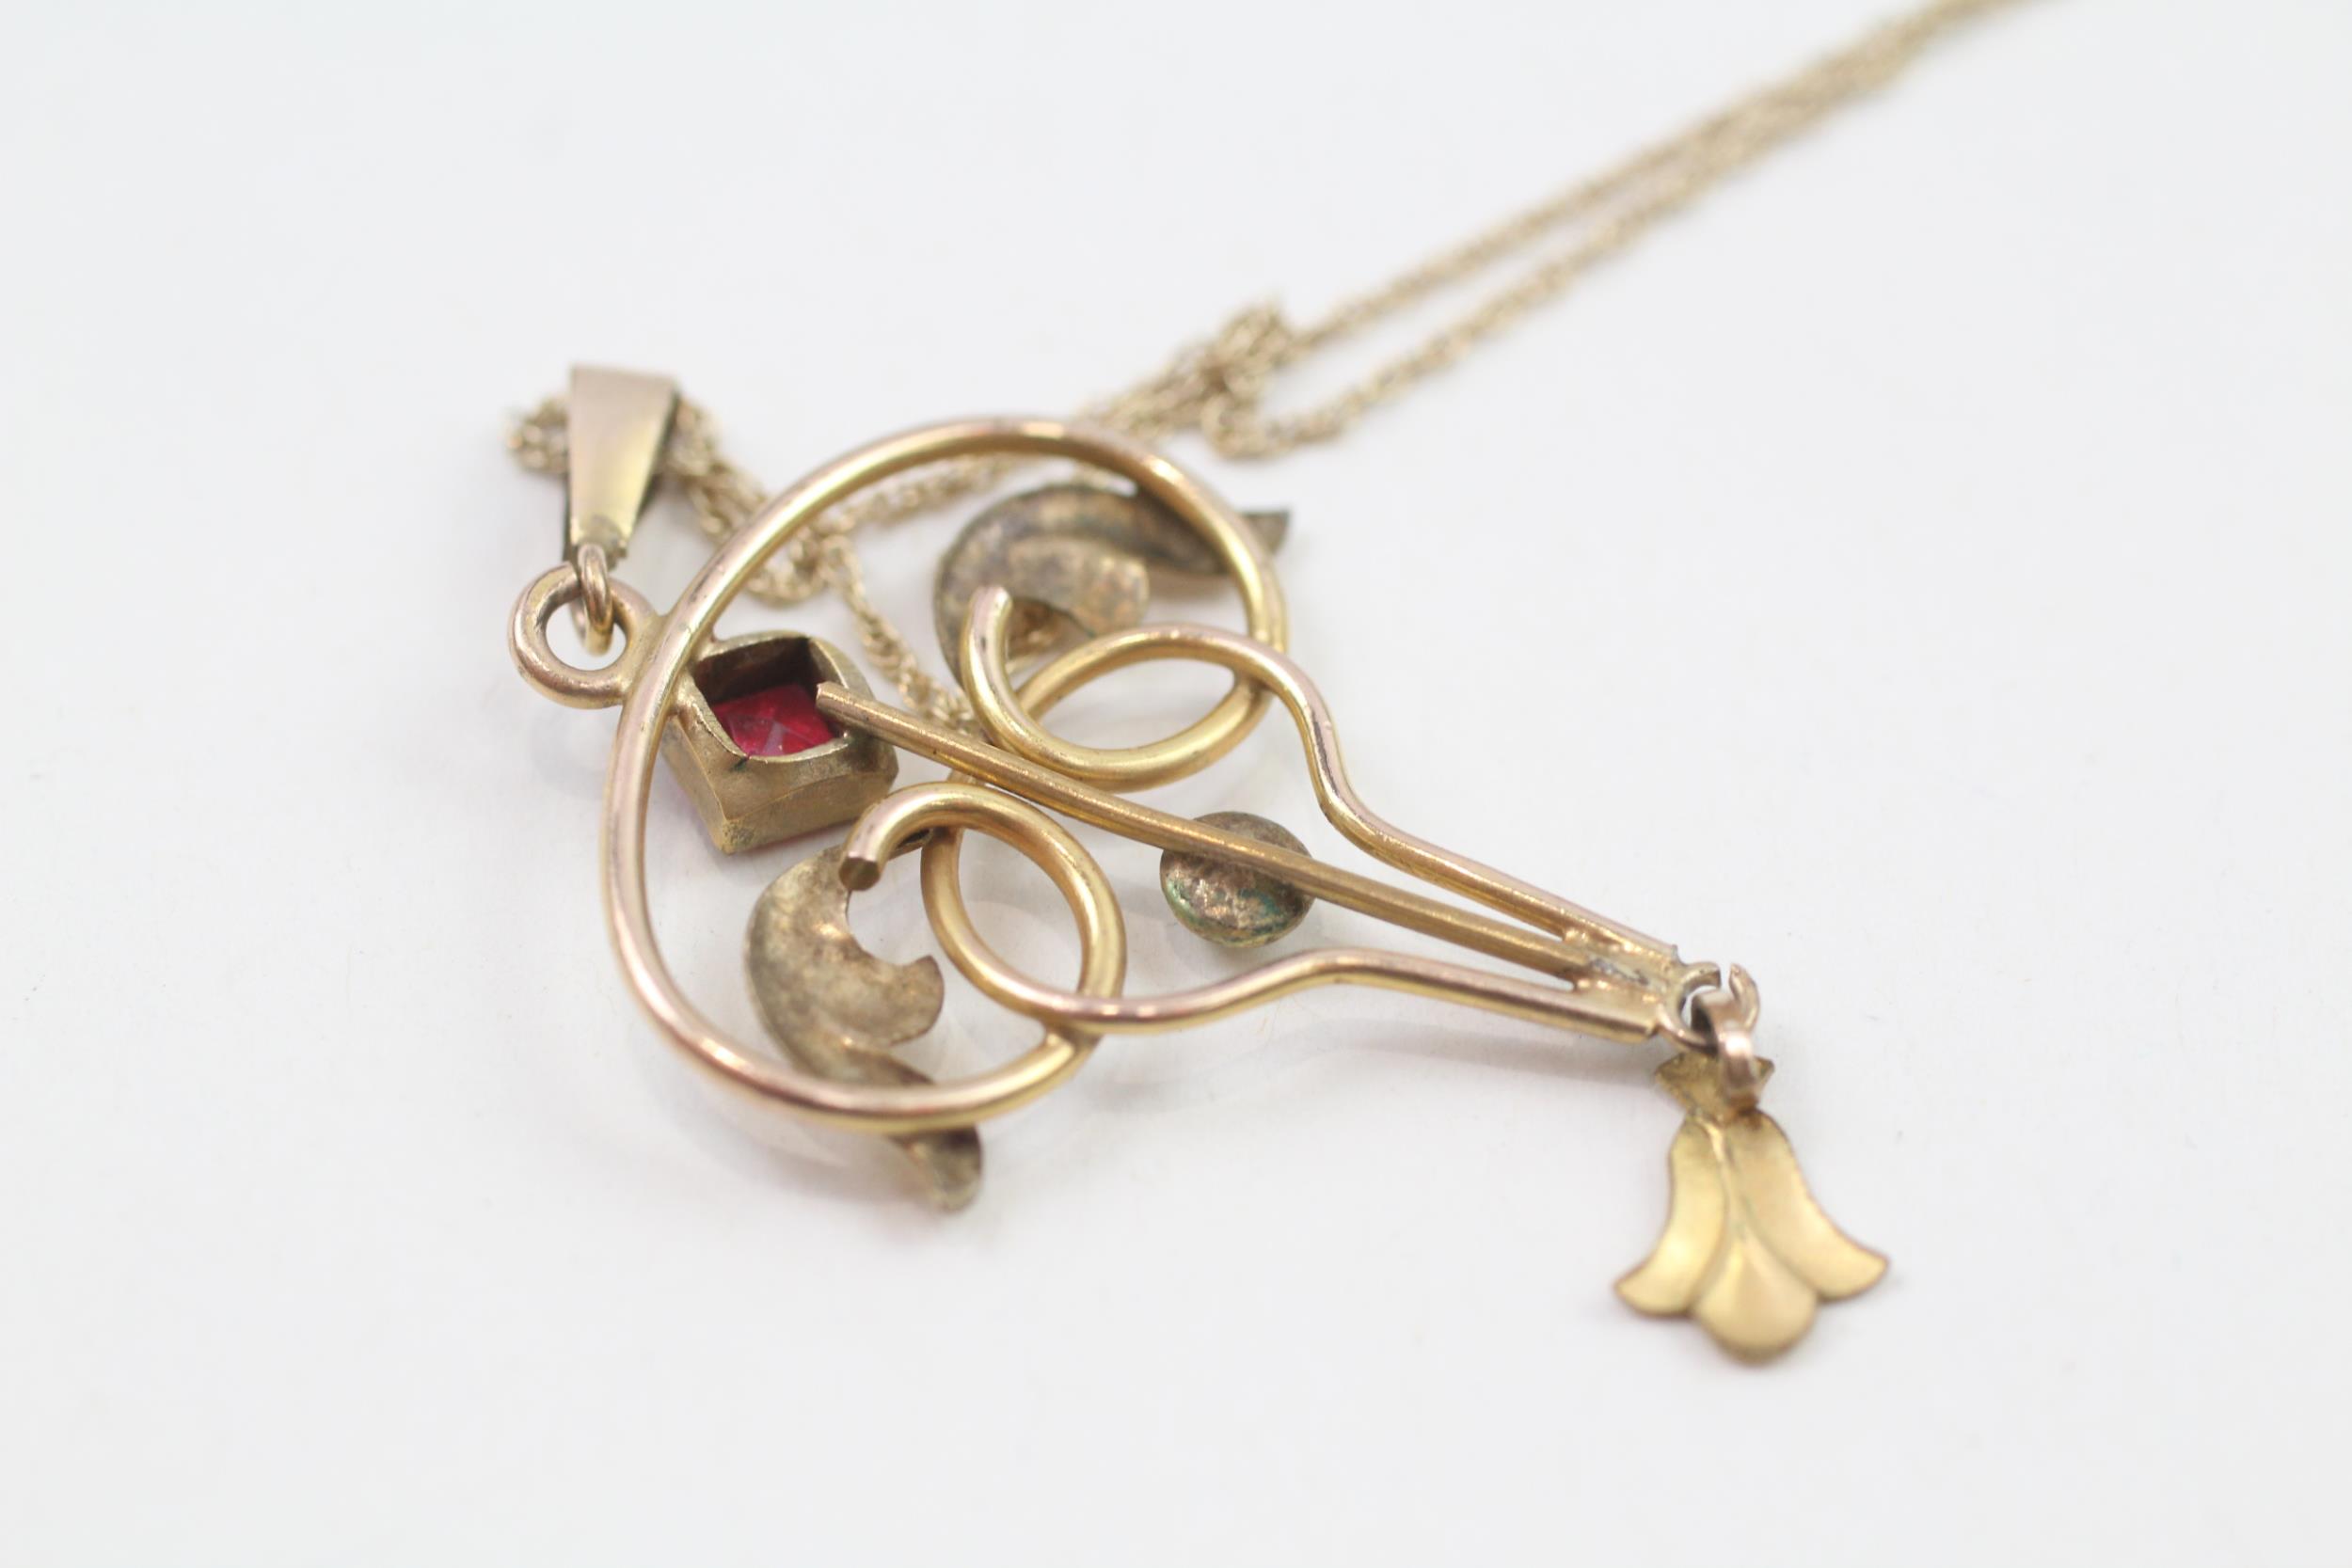 9ct gold antique pearl & garnet paste pendant necklace with later chain (3.1g) - Image 5 of 5